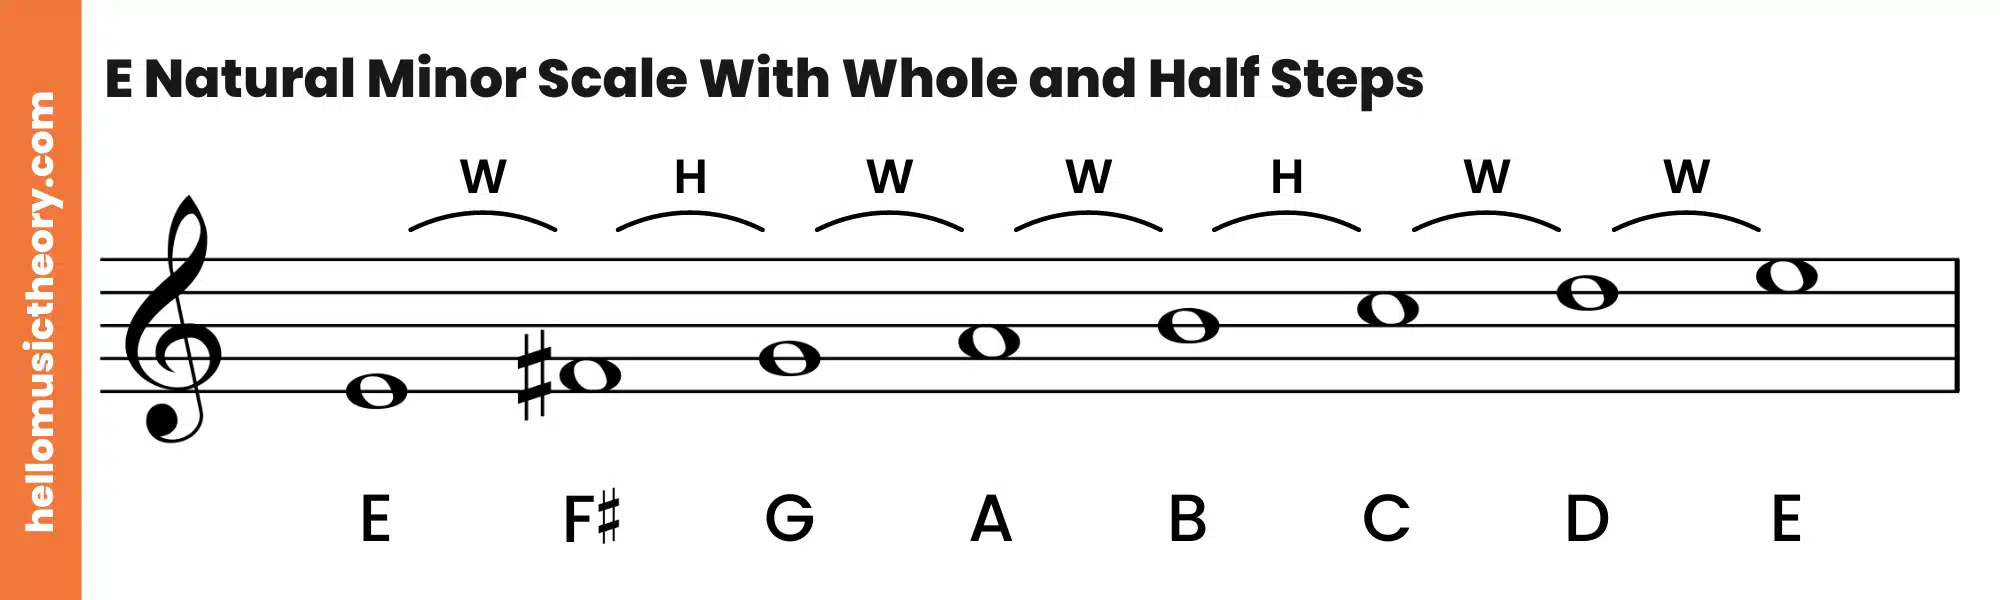 E Natural Minor Scale With Whole and Half Steps